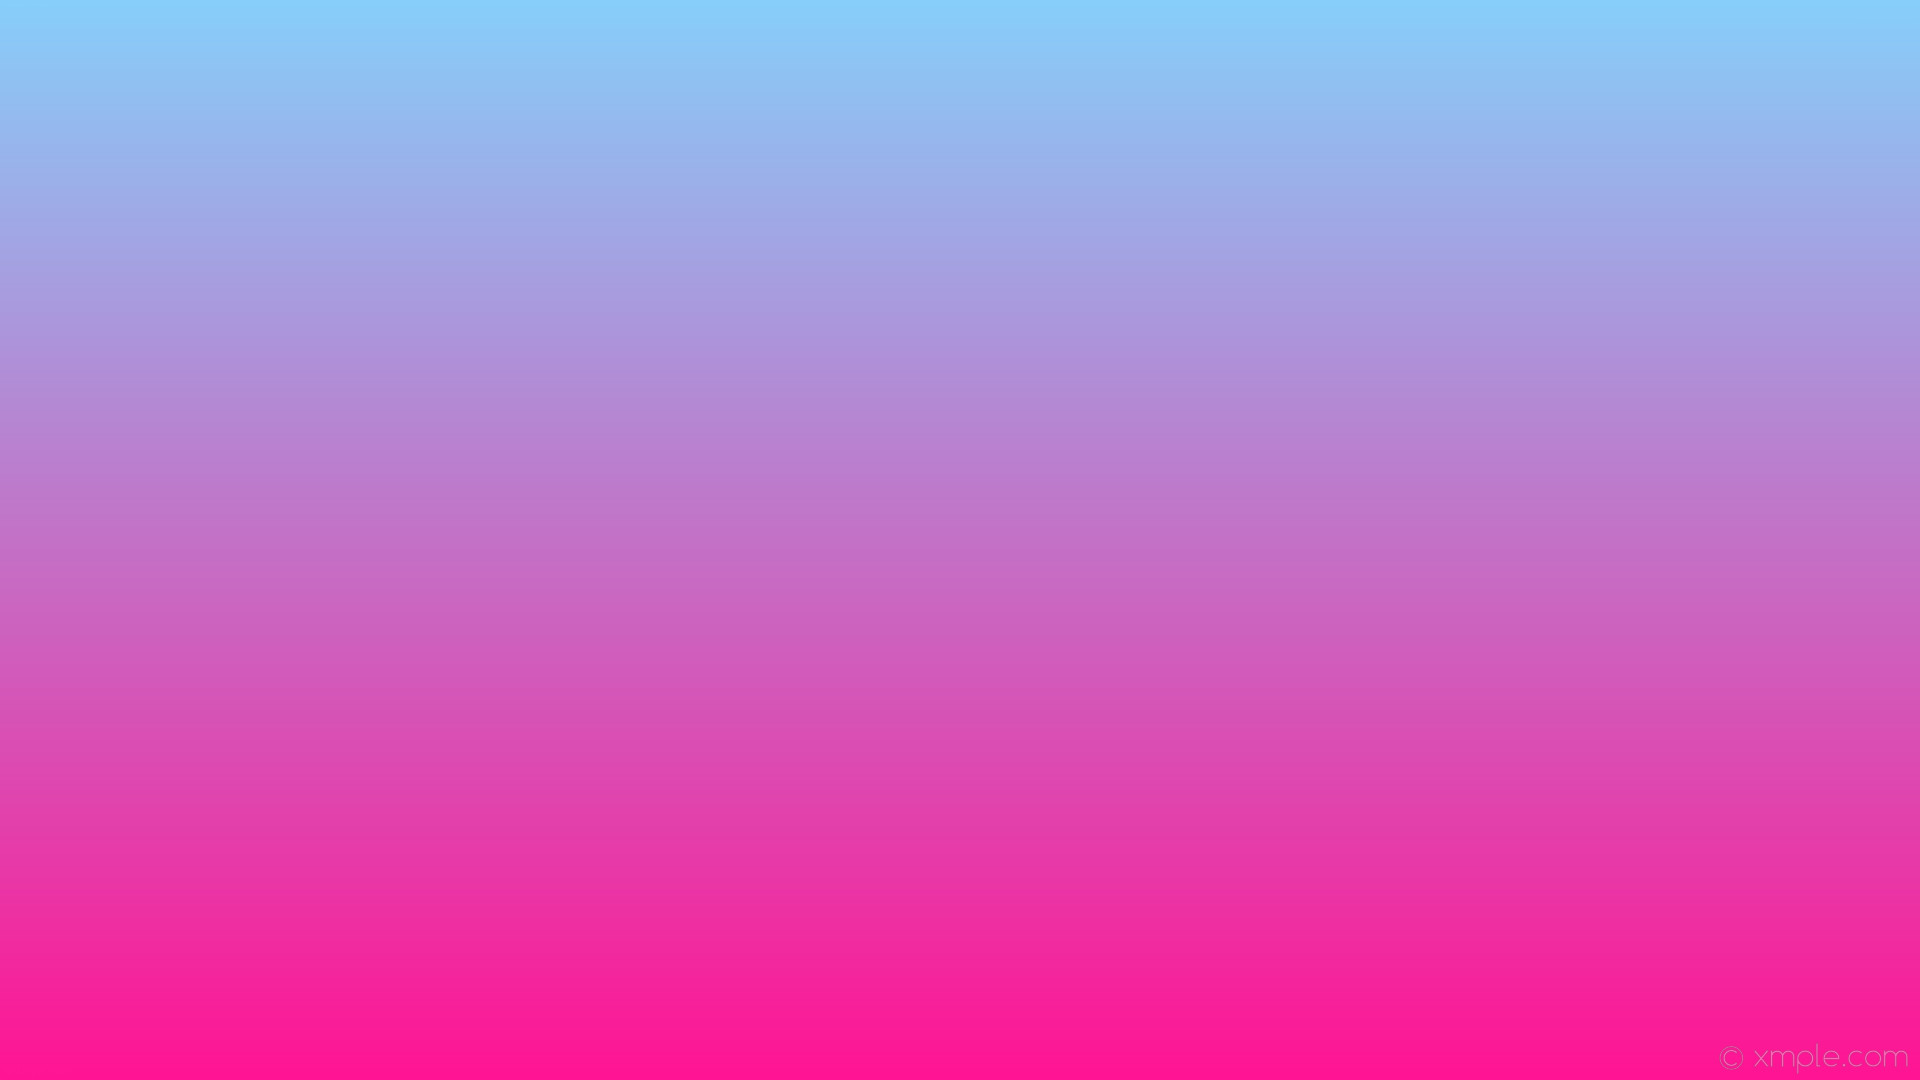 Download Pink Ombre Background 1824 X 2736